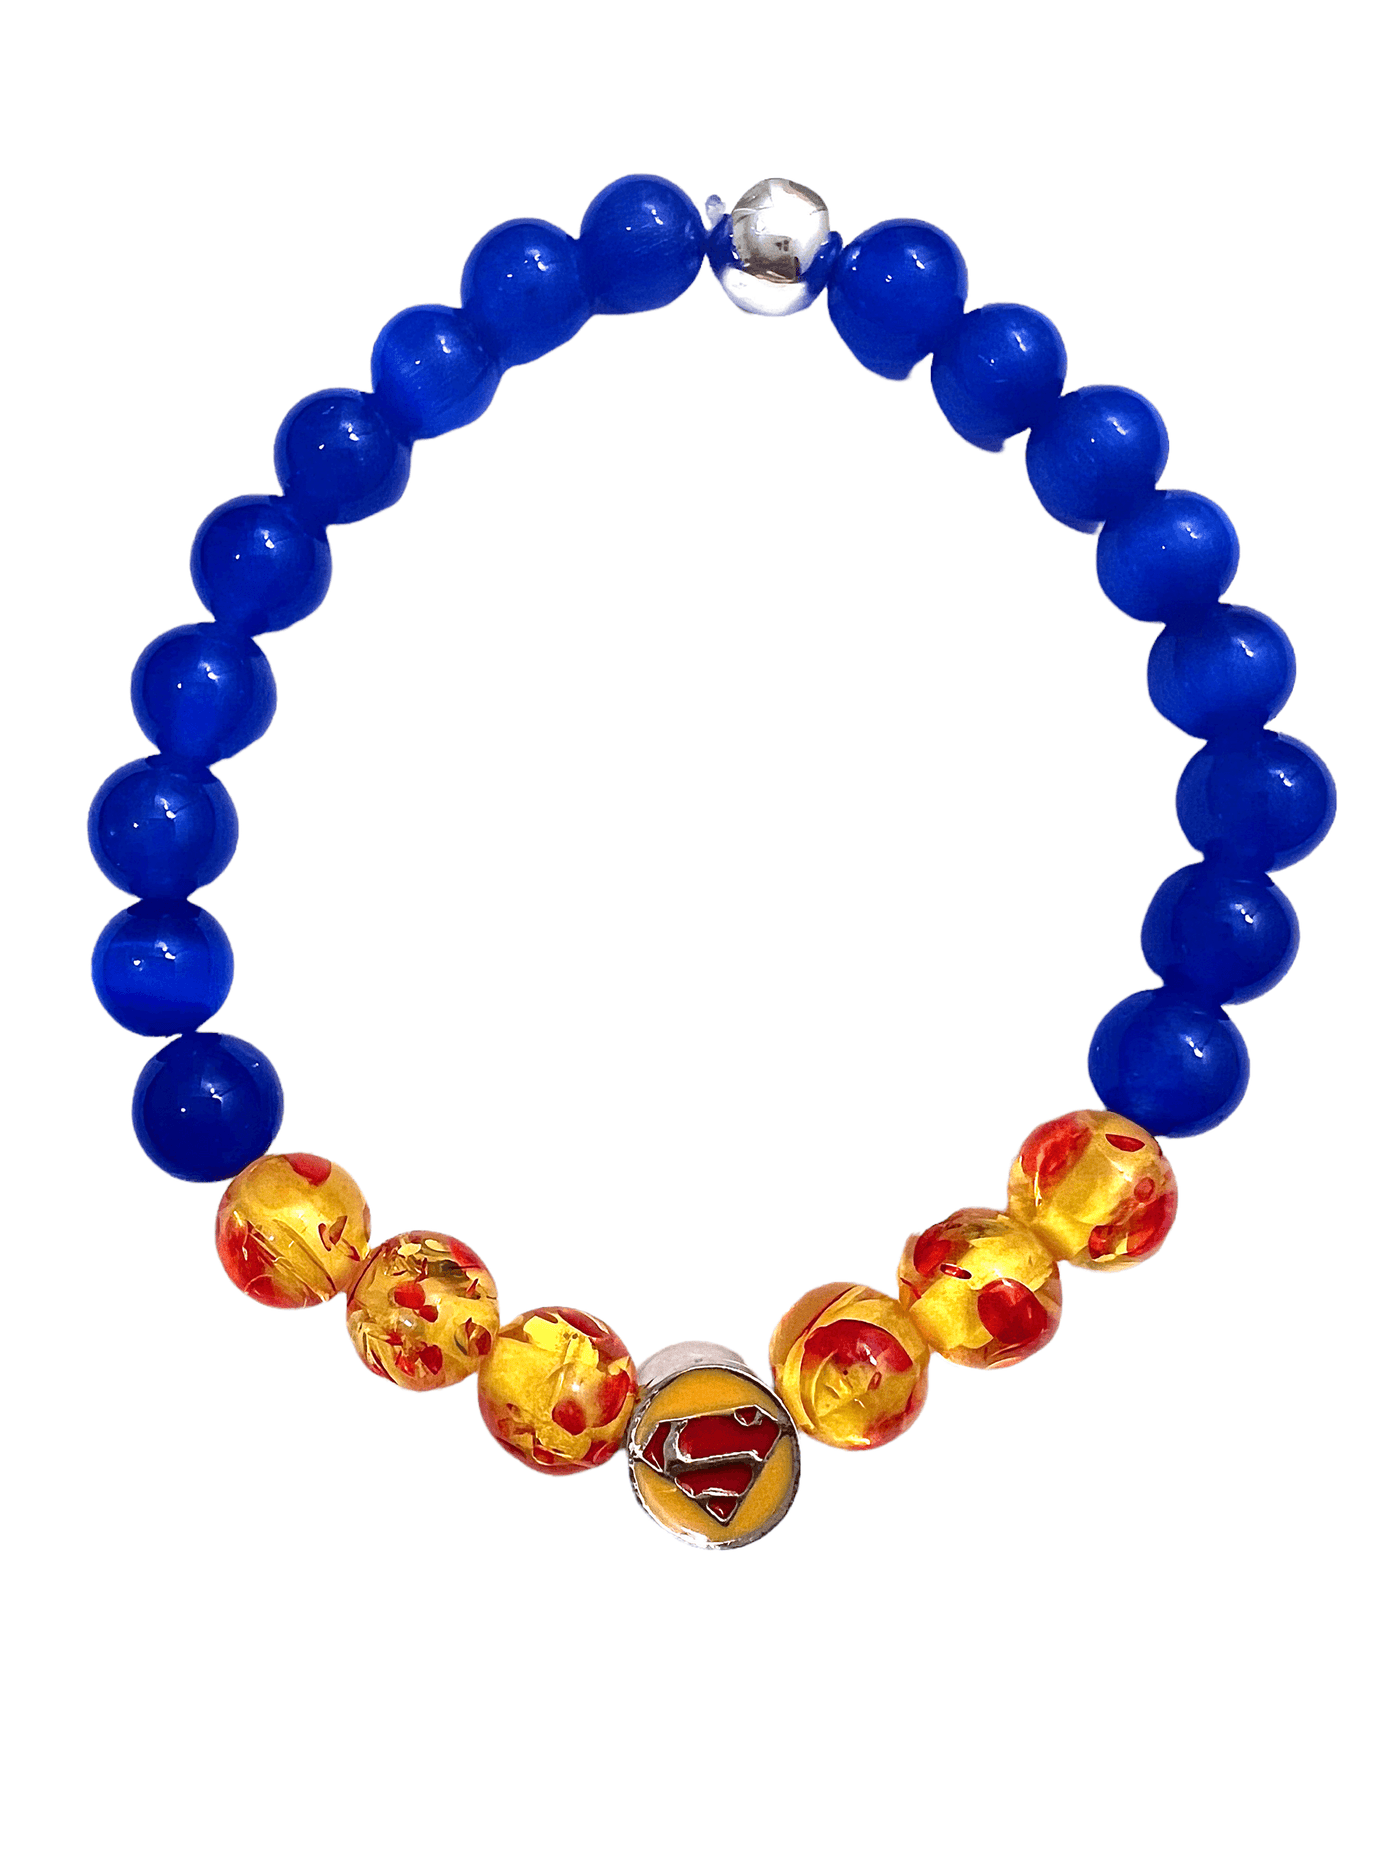 Superman Charm with Red and Yellow beads along with Blue Beads and a Hematite Bead - Brent's Bling